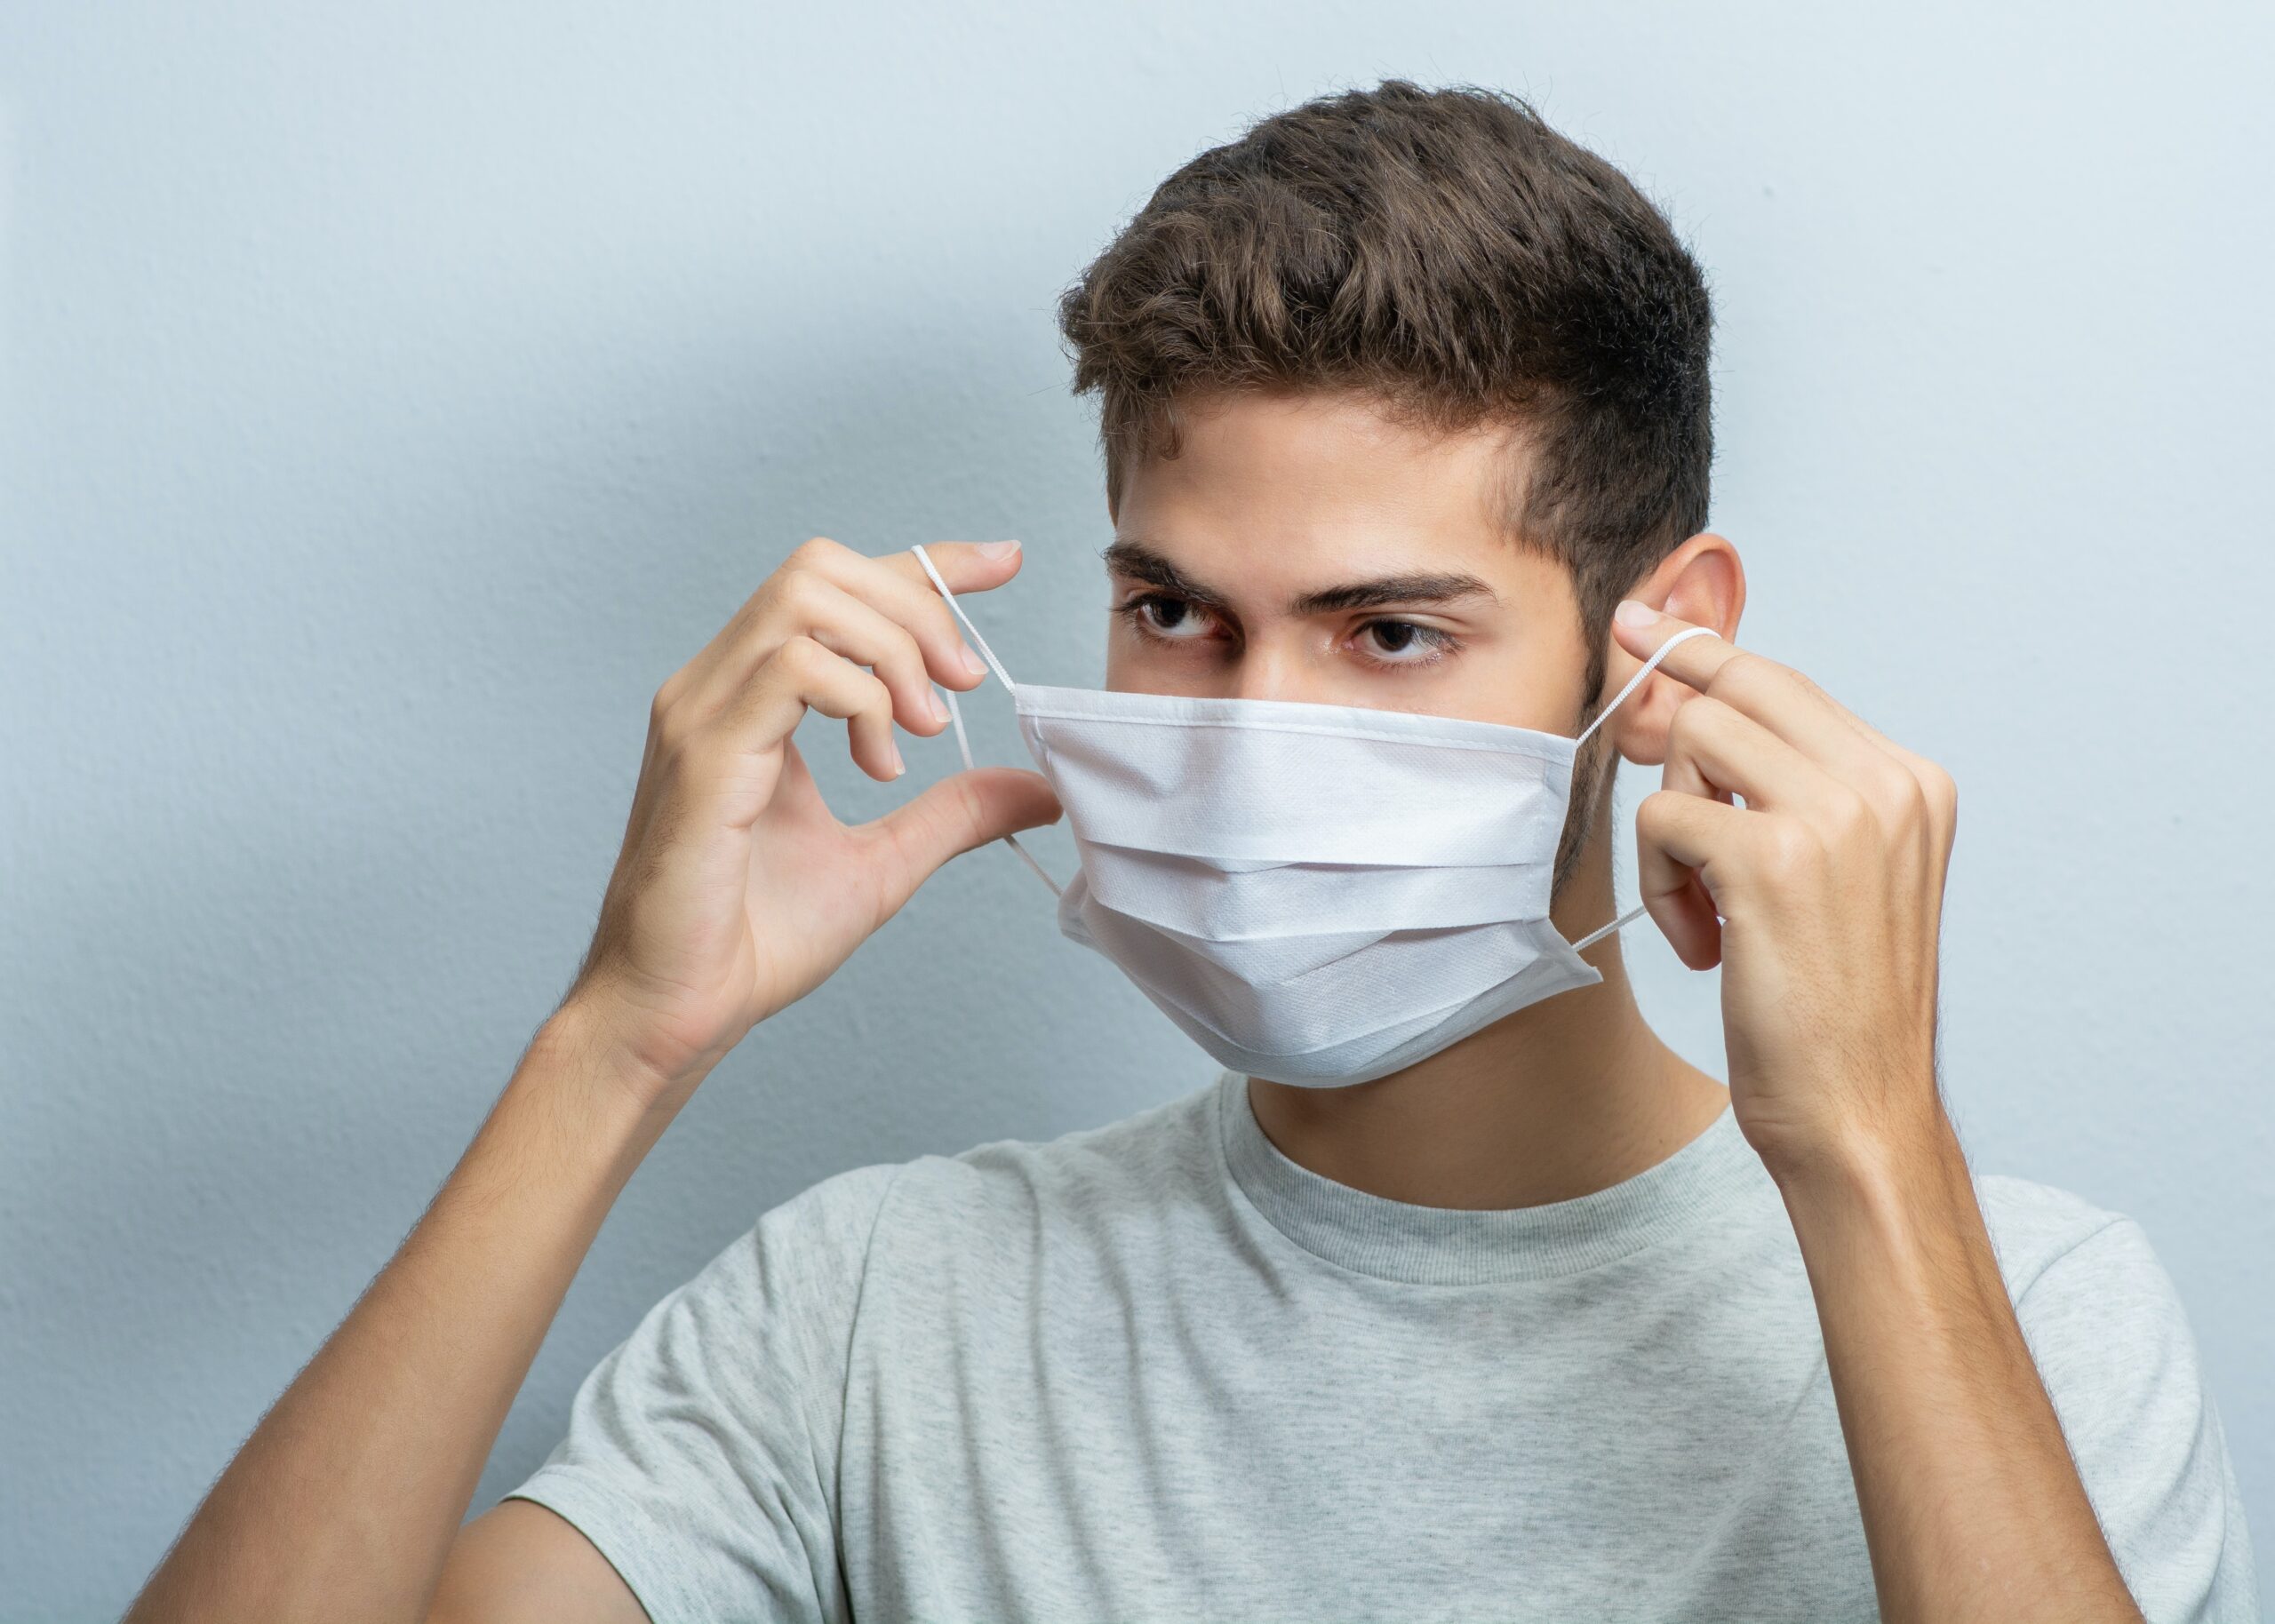 Young man putting on a facemask during Covid 19 pandemic